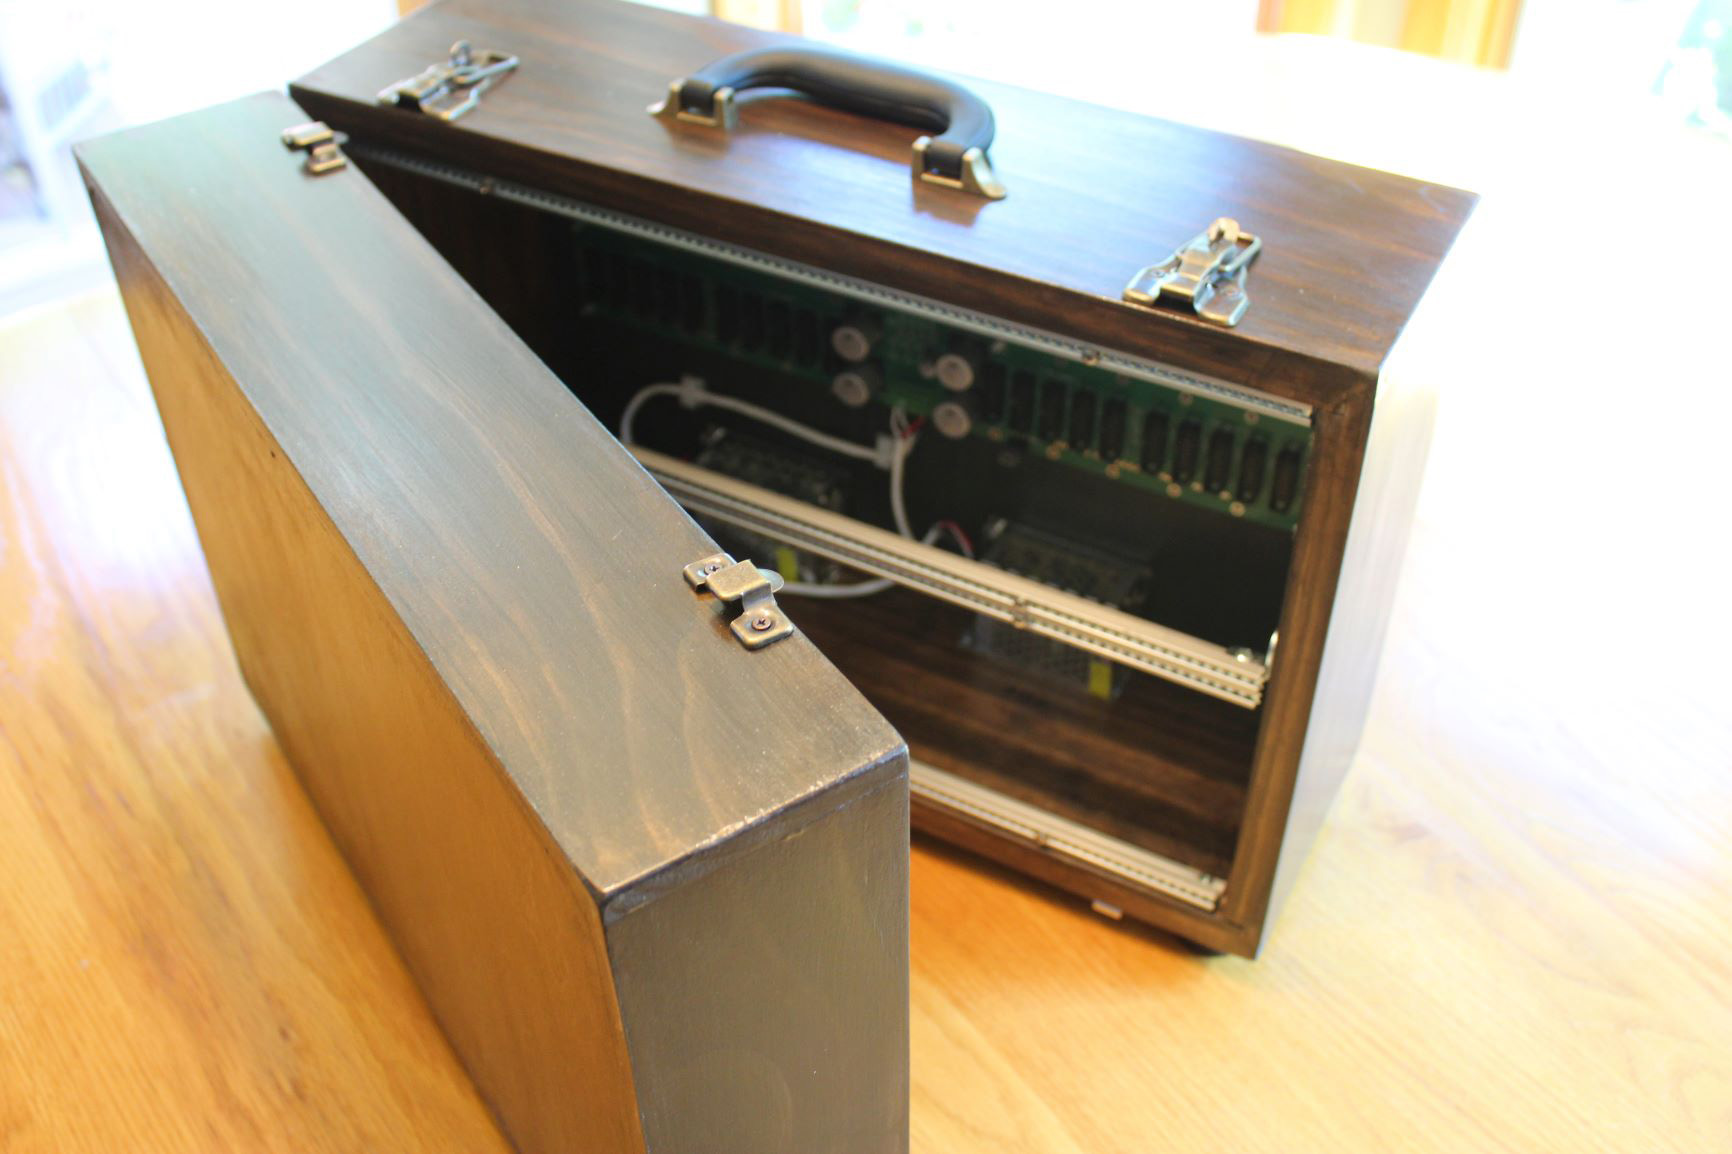 Angled view of the 6Ux84HP Portable Eurorack Case with the cover